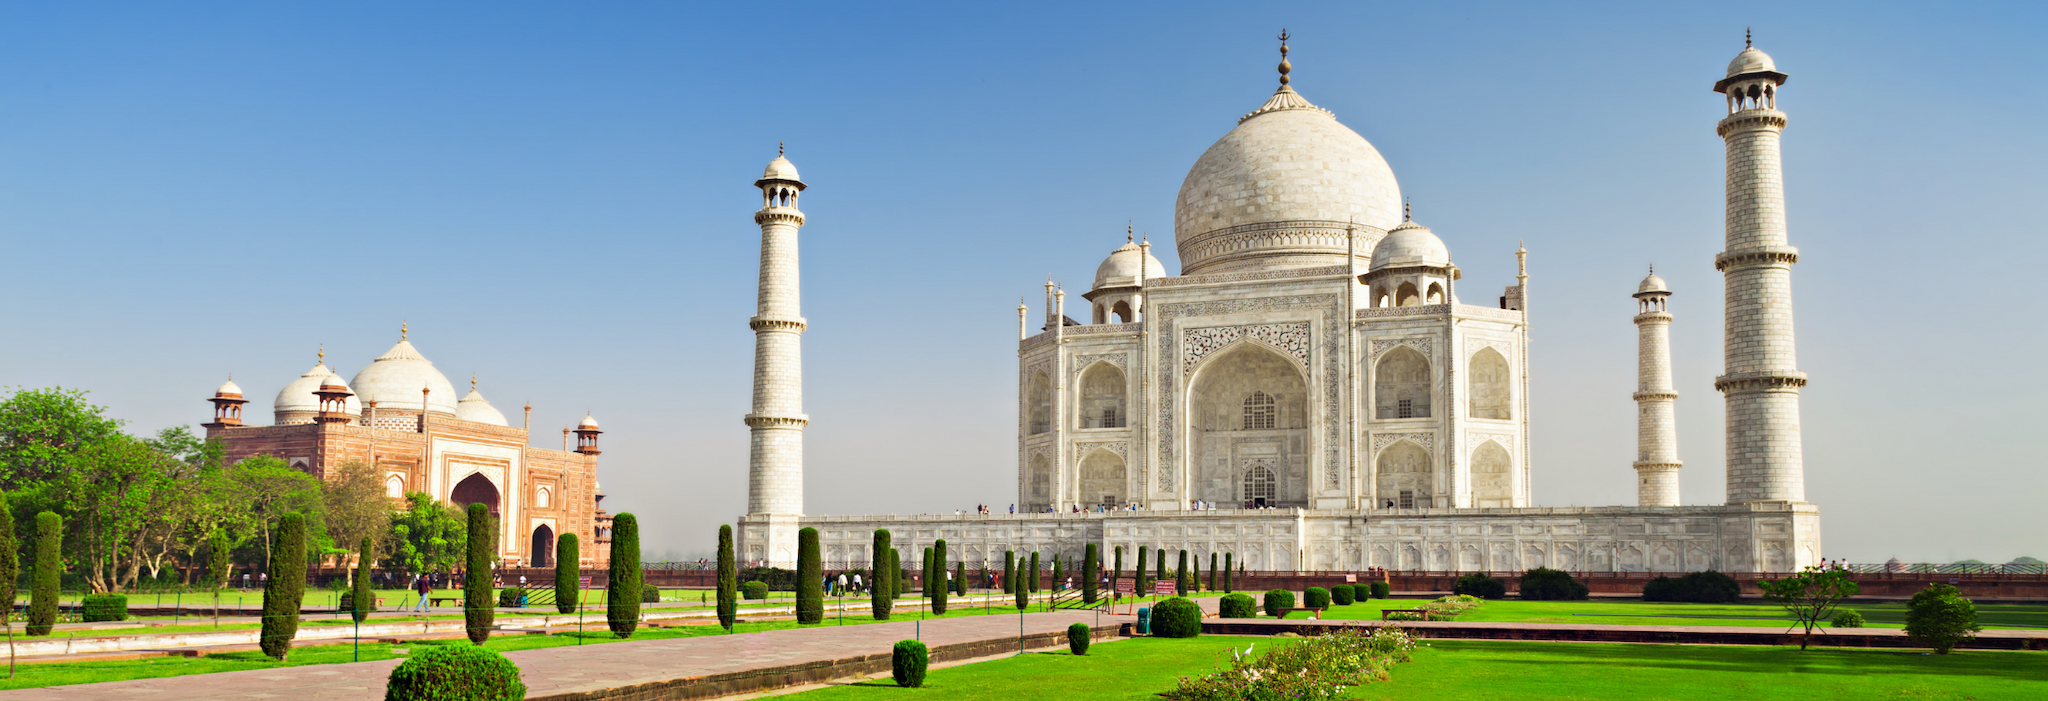 19 facts about Taj Mahal that are stranger than any fiction you’ve read or heard